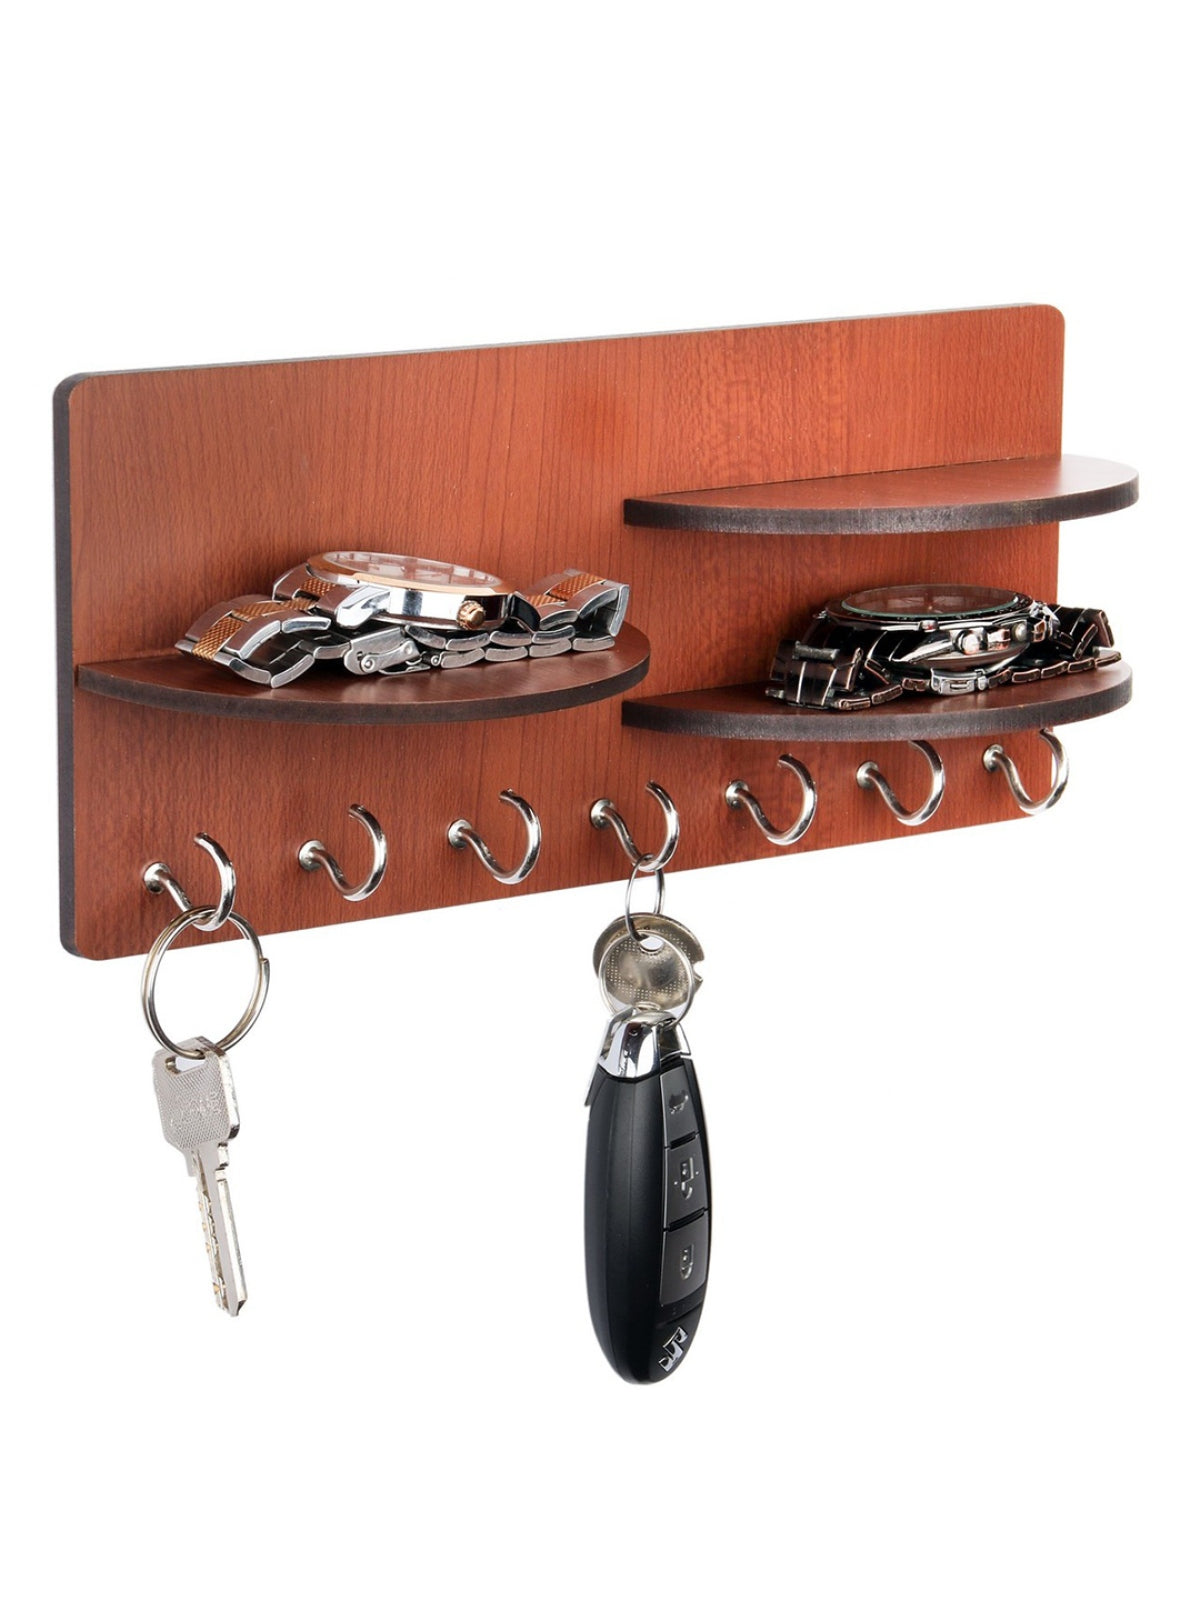 Wooden Key Holder With 3 Round Shelf For Home & Office Wall Decorative